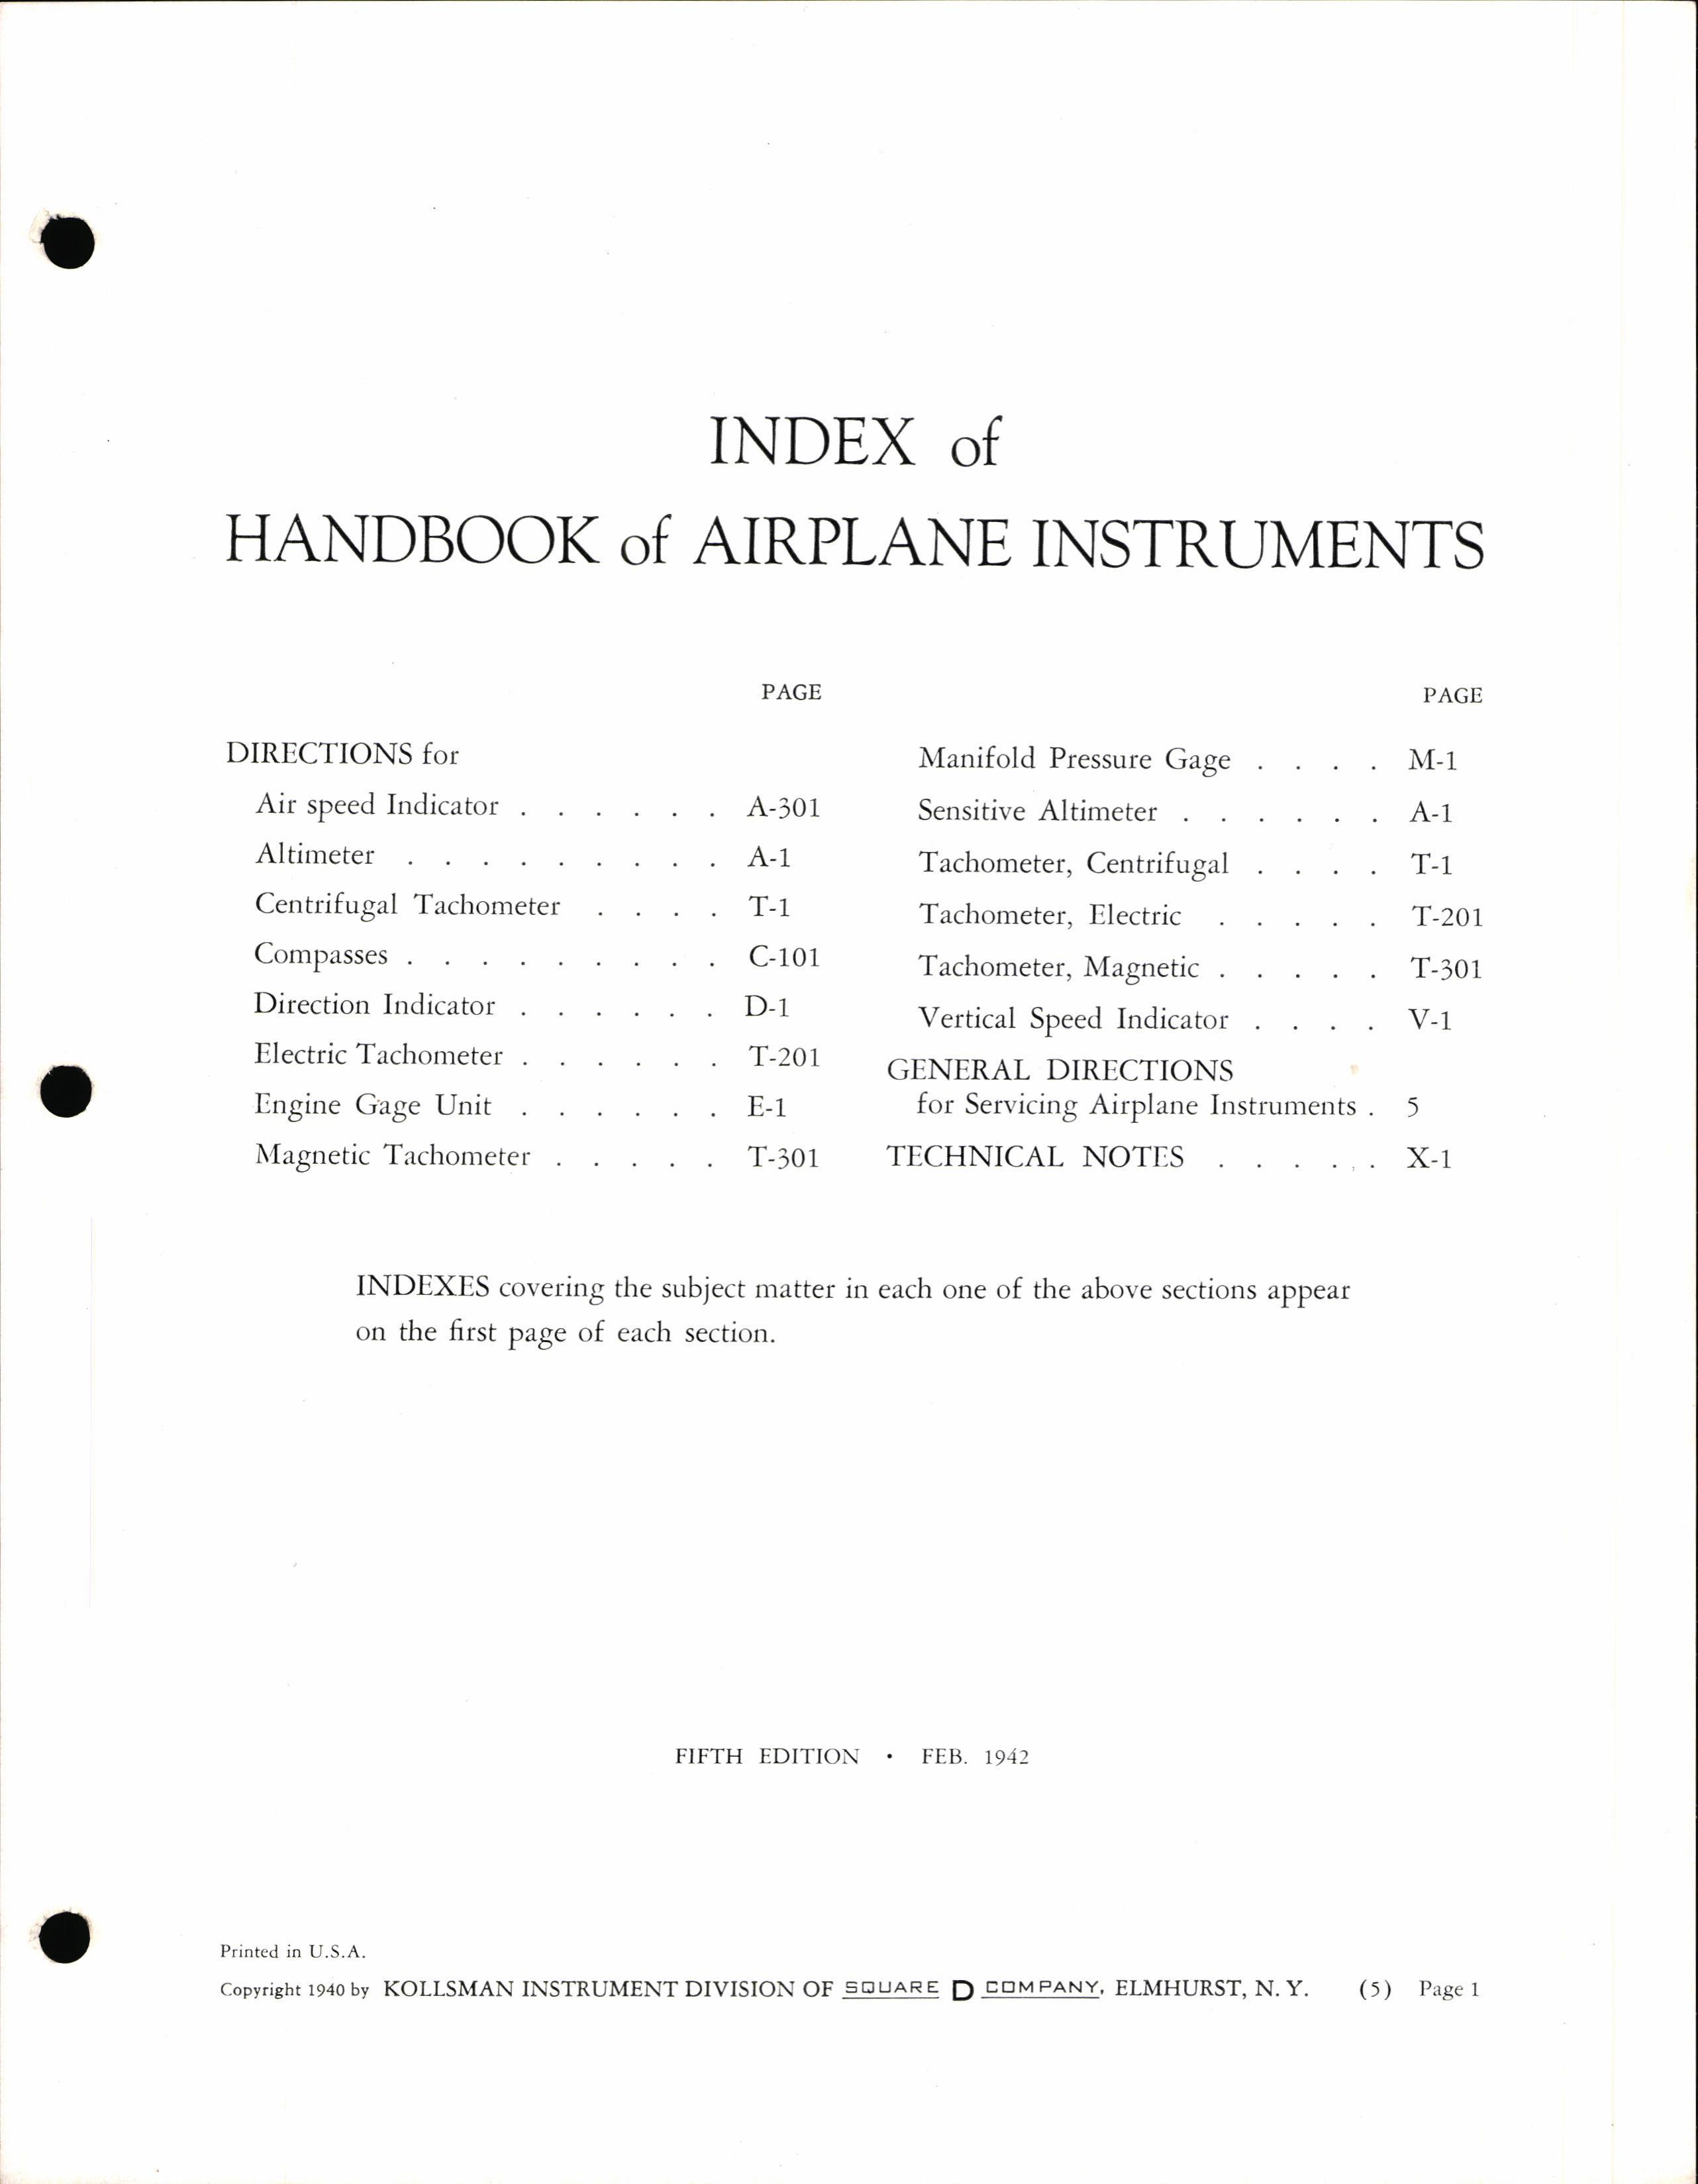 Sample page 4 from AirCorps Library document: Handbook of Airplane Instruments